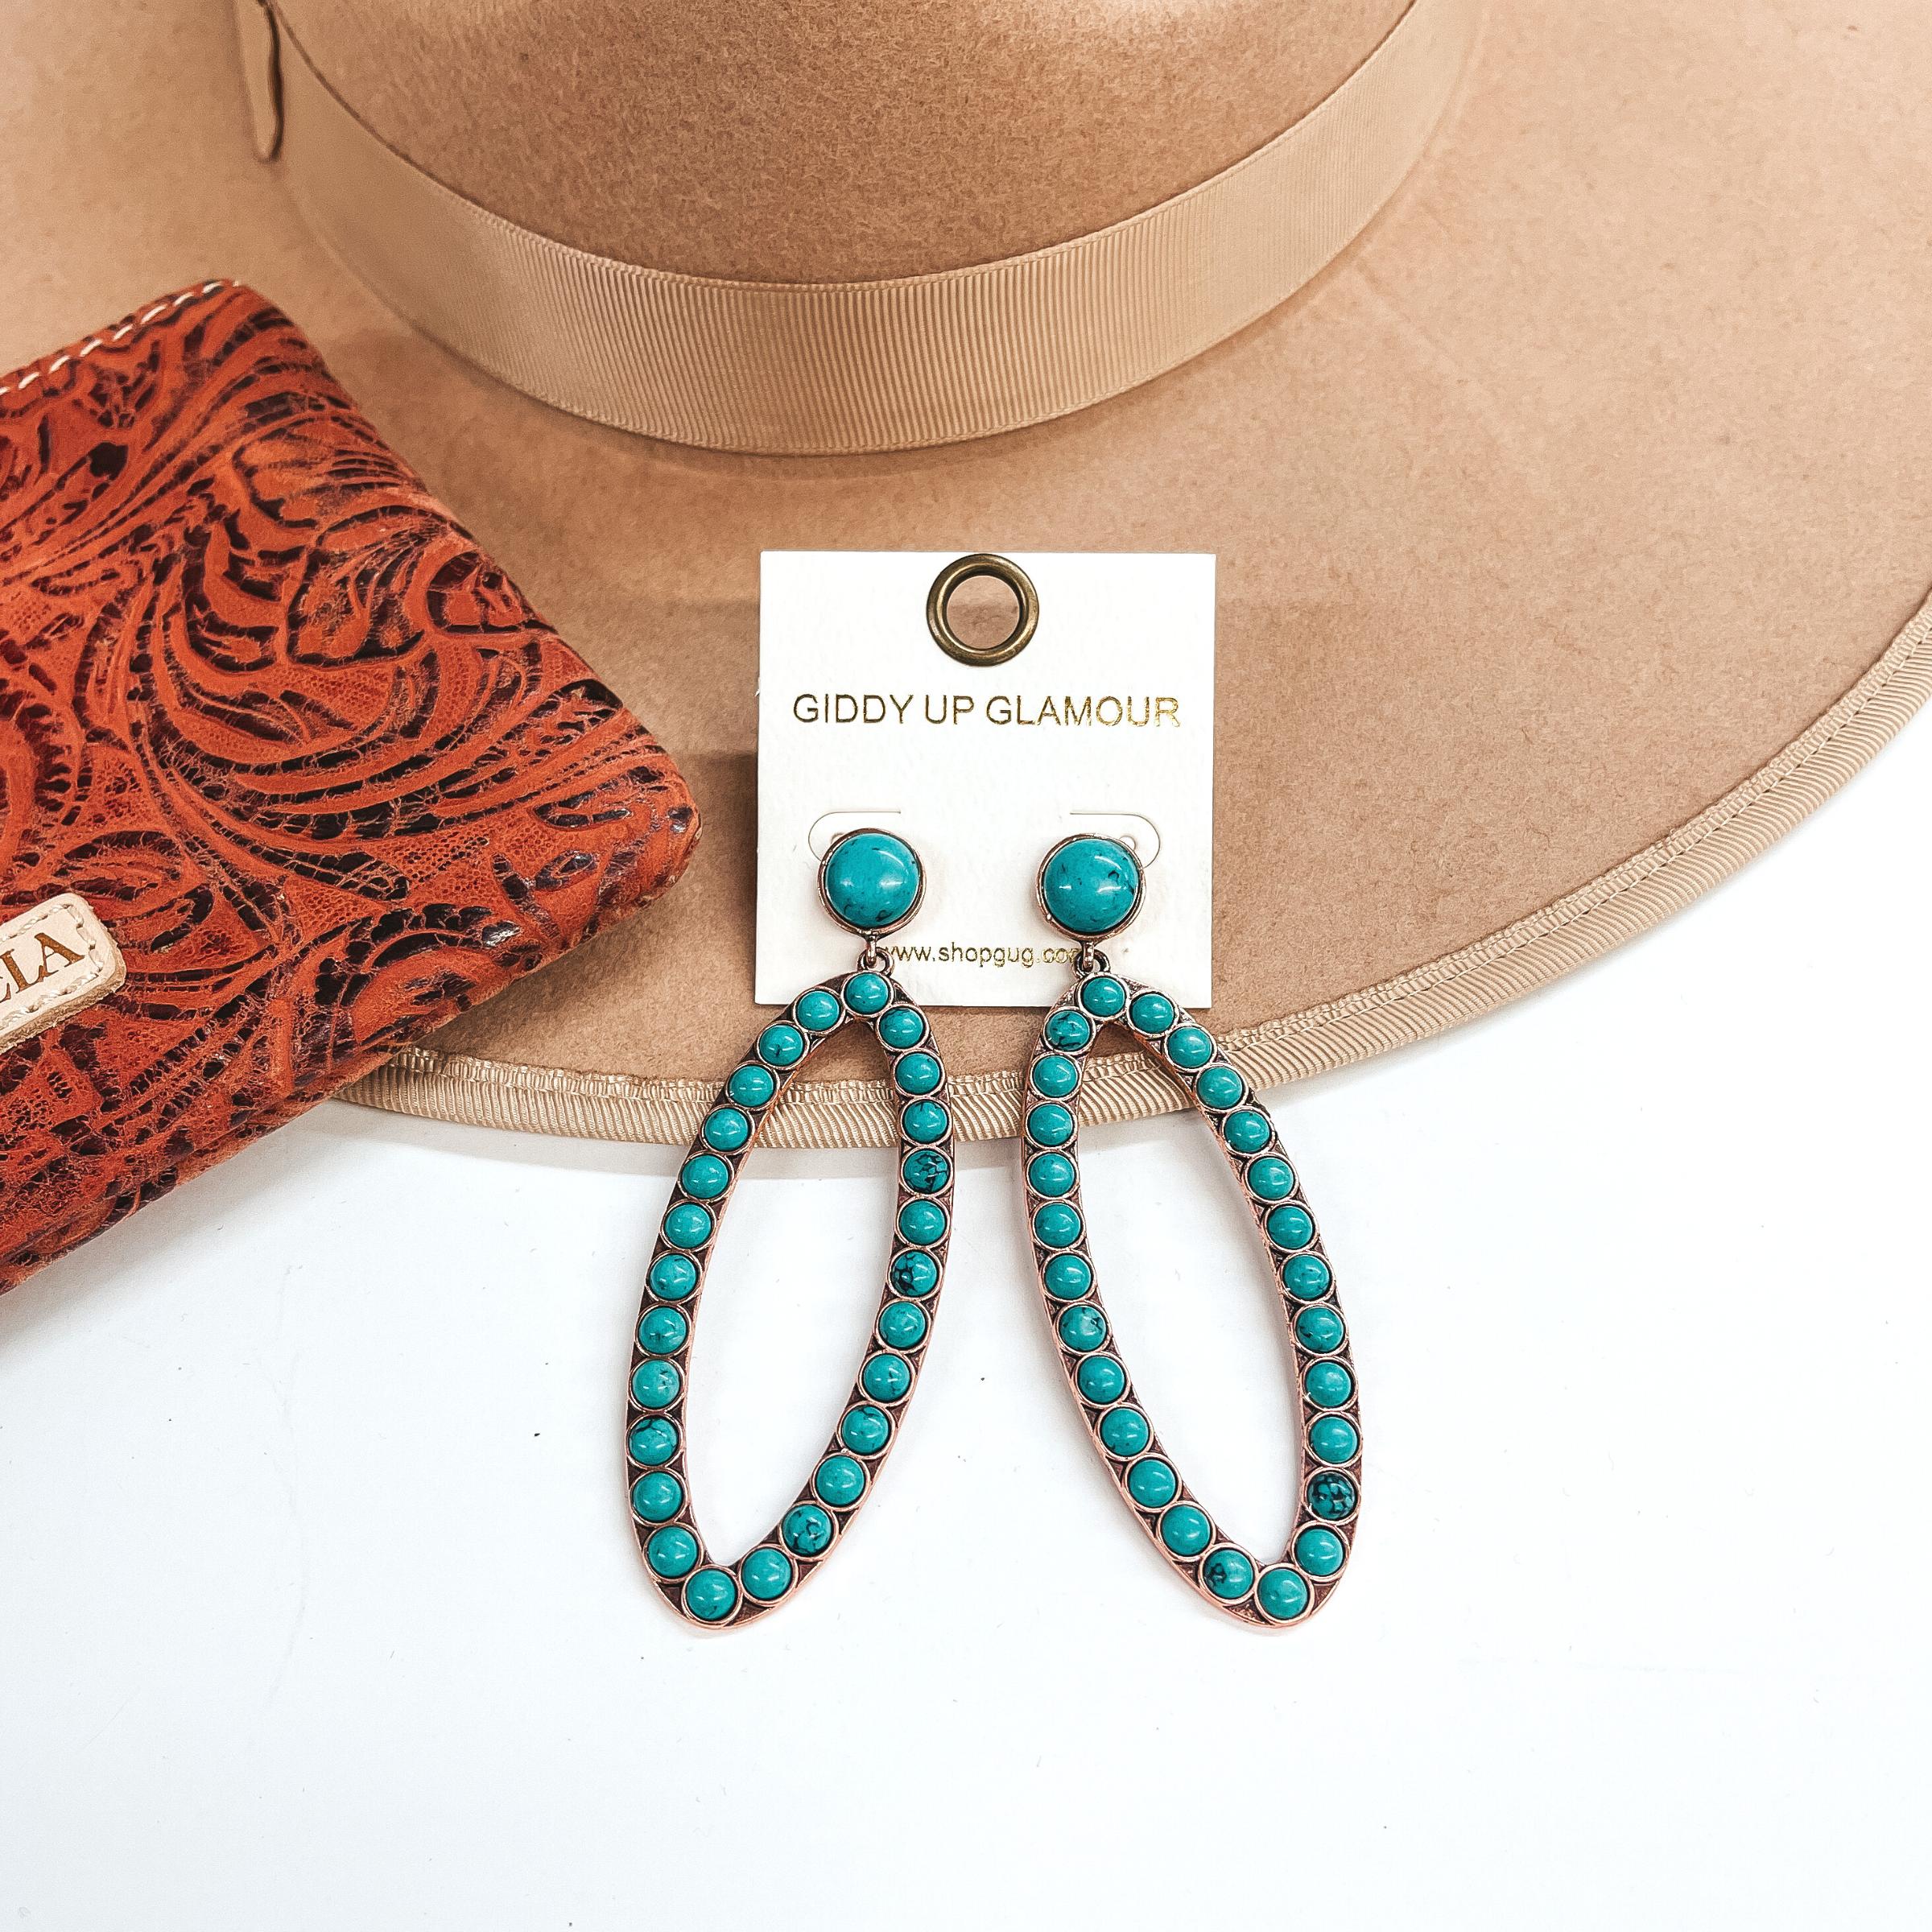 These are open oval drop earrings with turquoise  stones.  Post back earrings with a small stone and an open  oval drop with turquoise stones all around in a  copper setting.  These are  taken on a light brown hat brim and white background.  There is a leather printed wallet in the side  as decor.